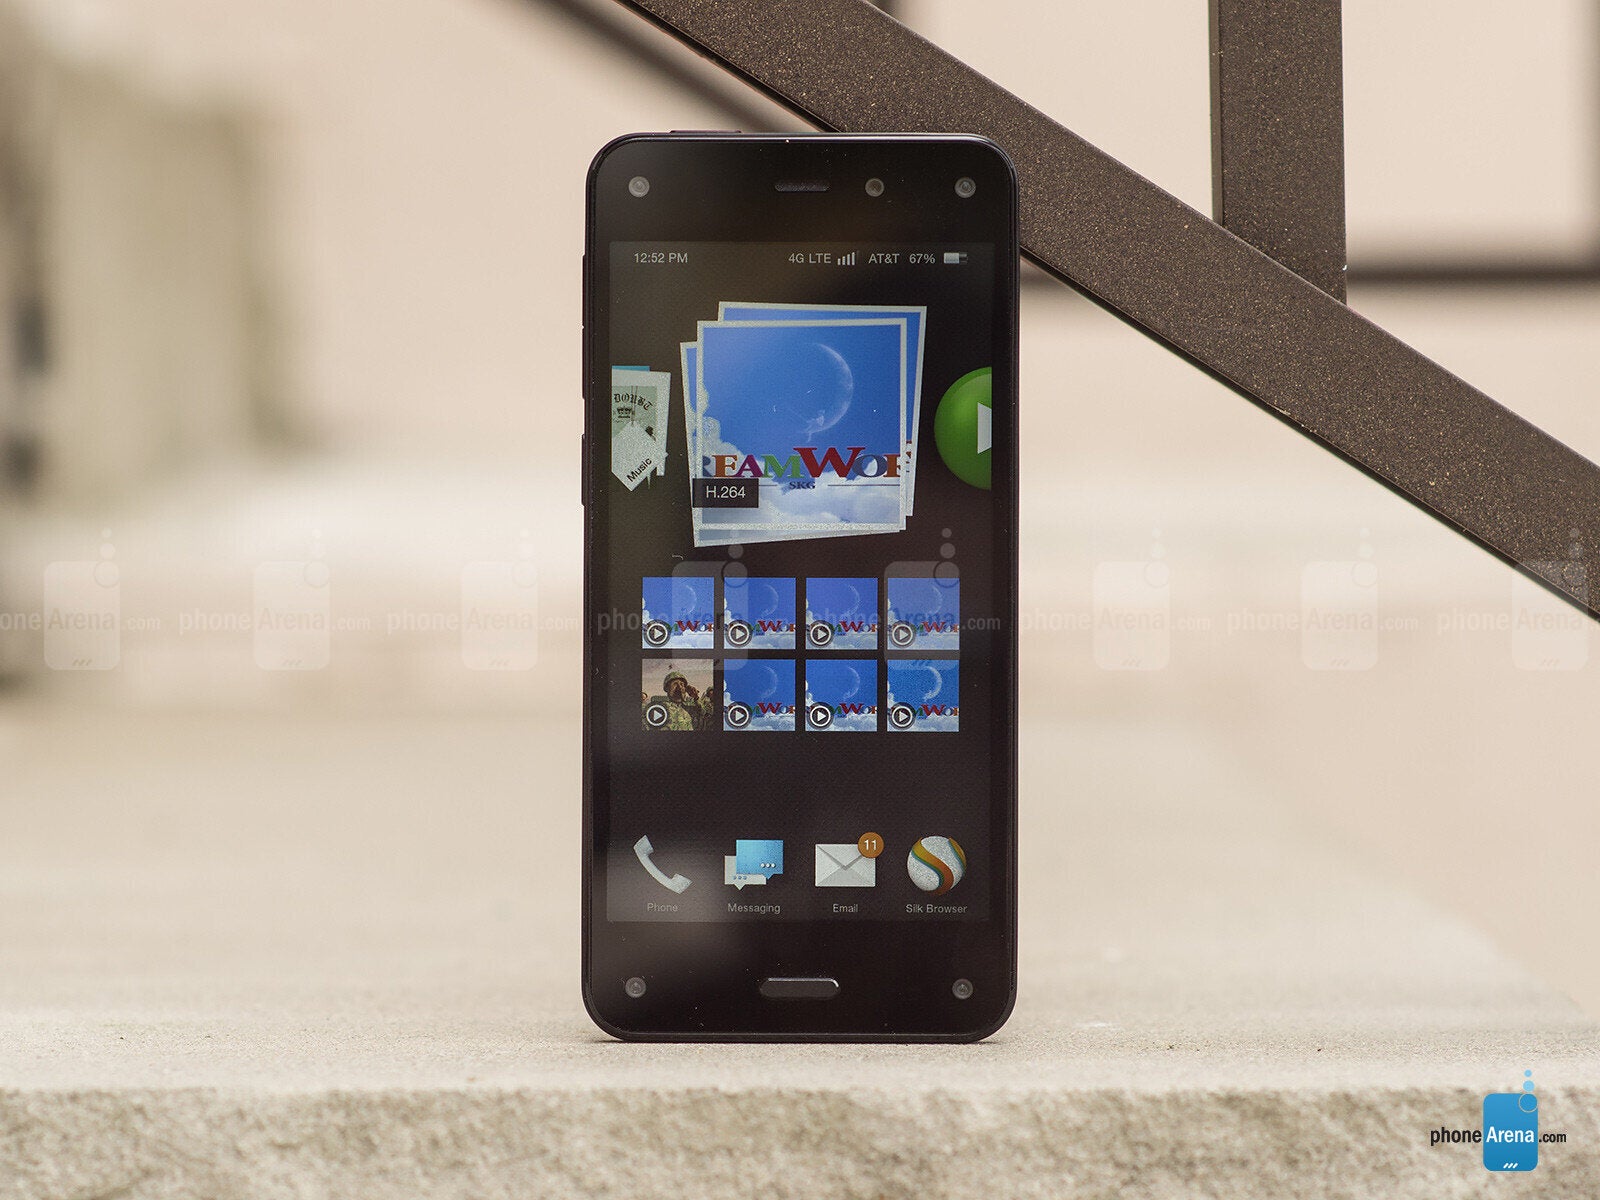 The Fire Phone is ancient history now - Amazon should go back to making smartphones already